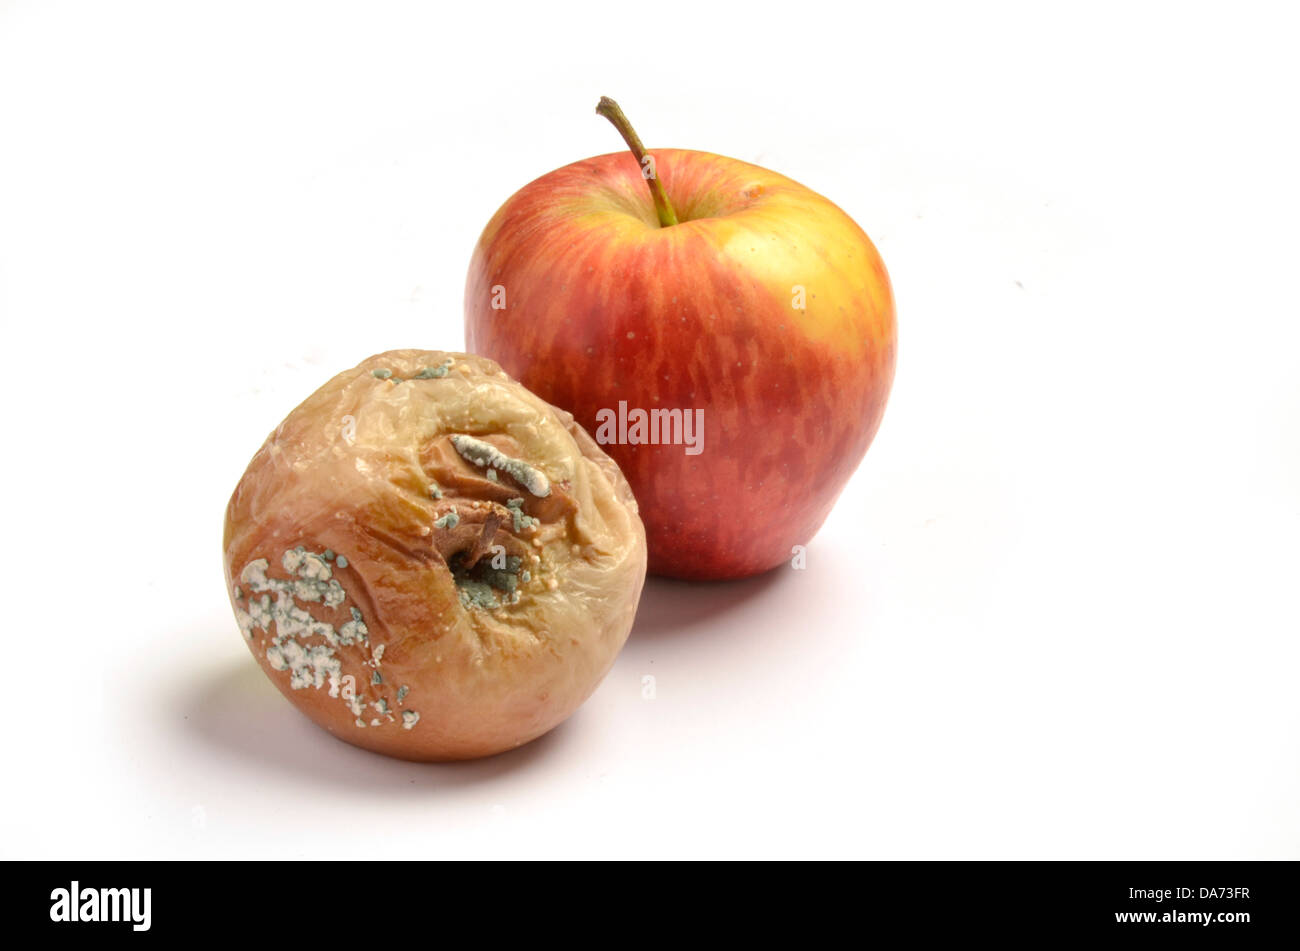 Rotten, moldy apple compared to a healthy apple. Stock Photo